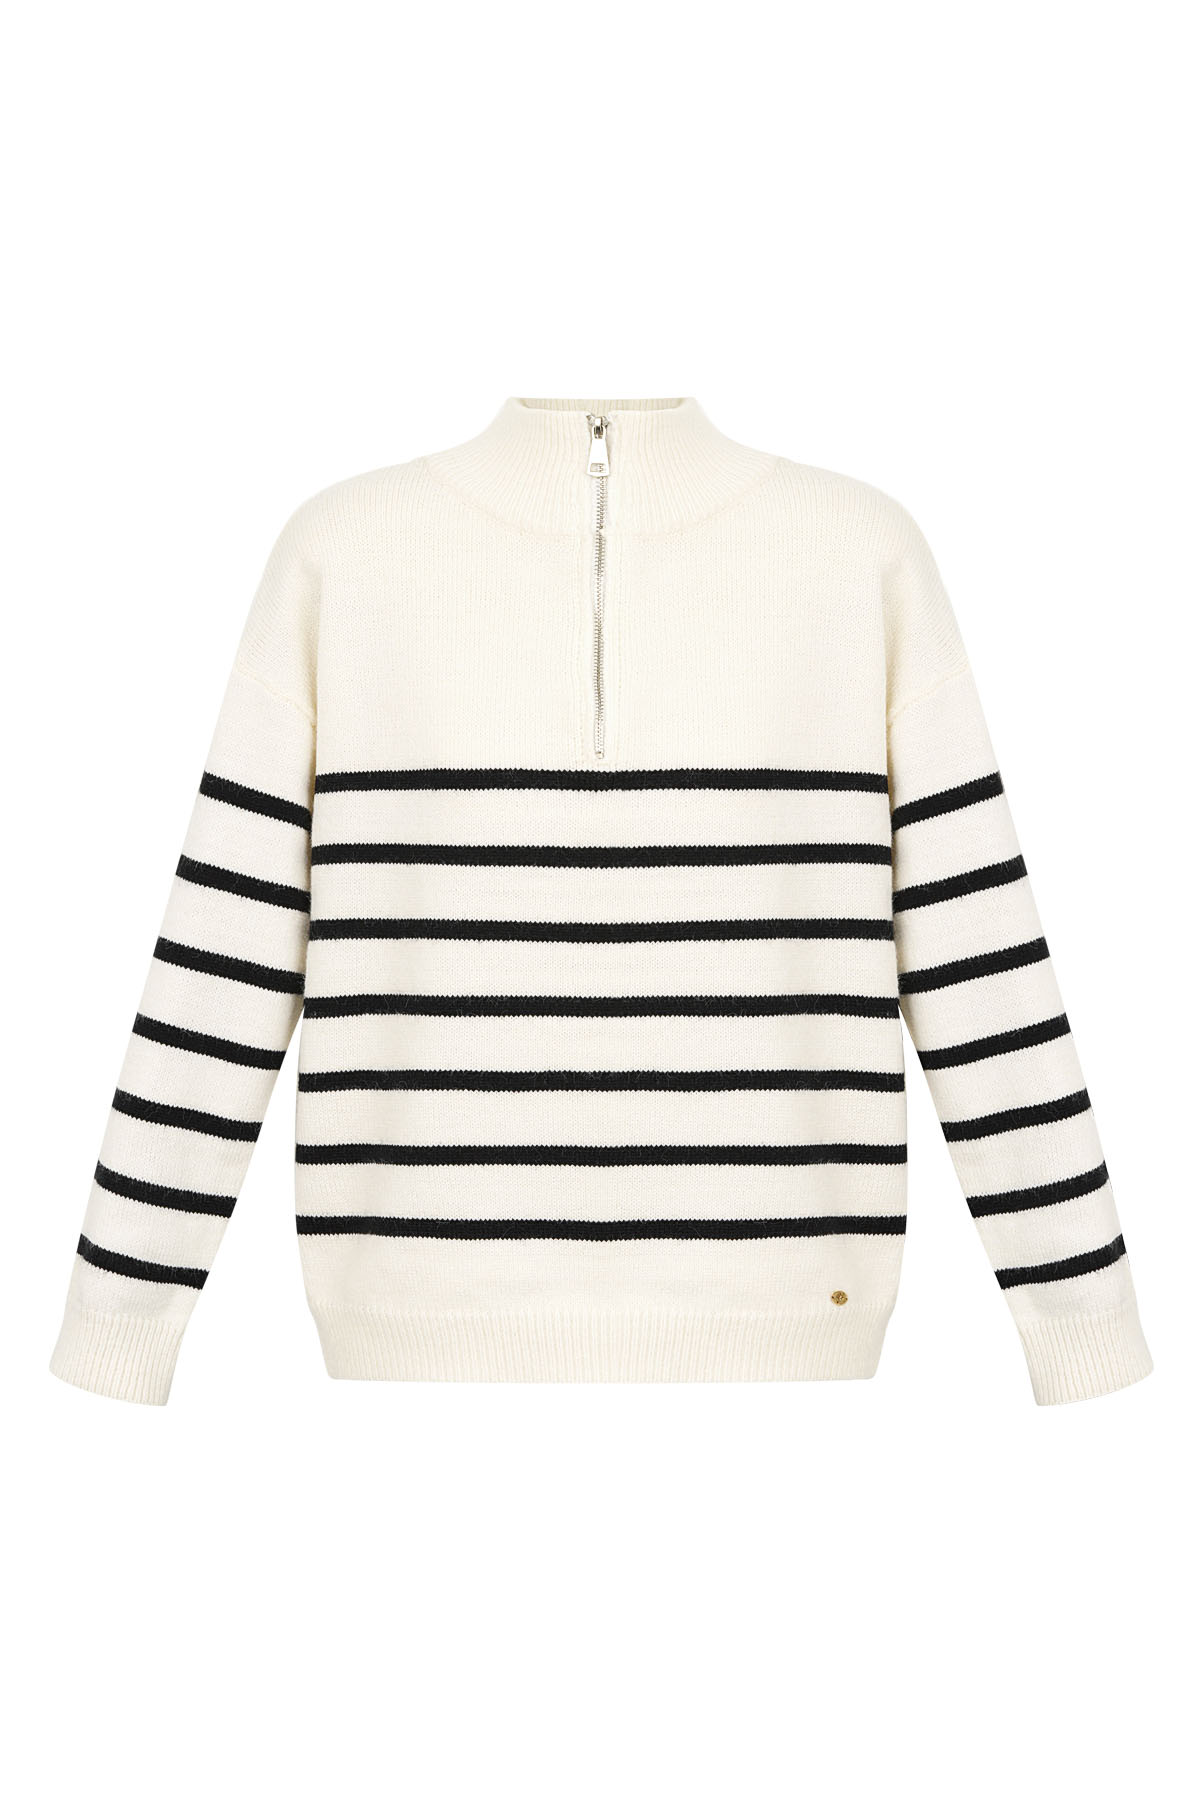 Knitted sweater stripe with zipper - black and white 